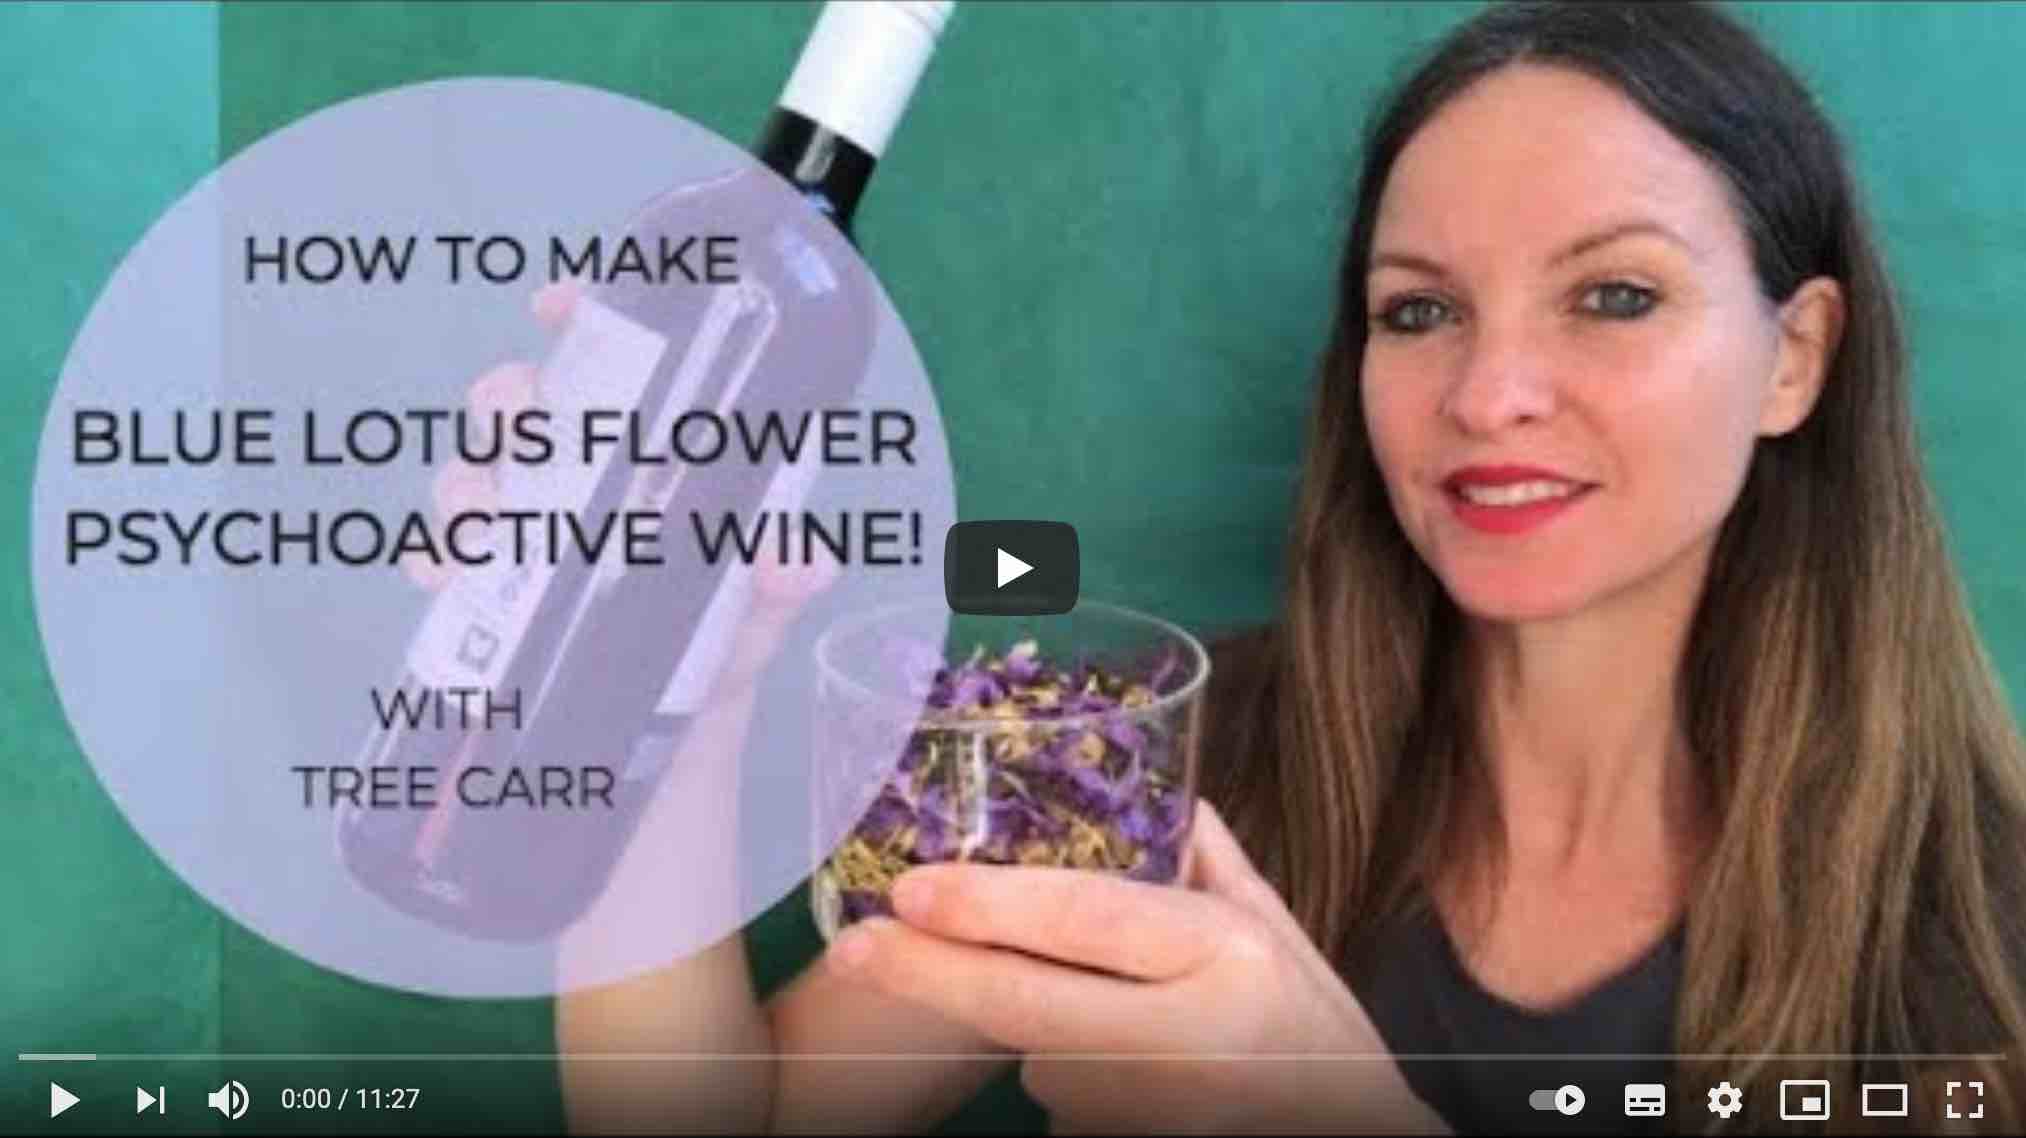 How to make Blue Lotus Flower psychoactive wine!